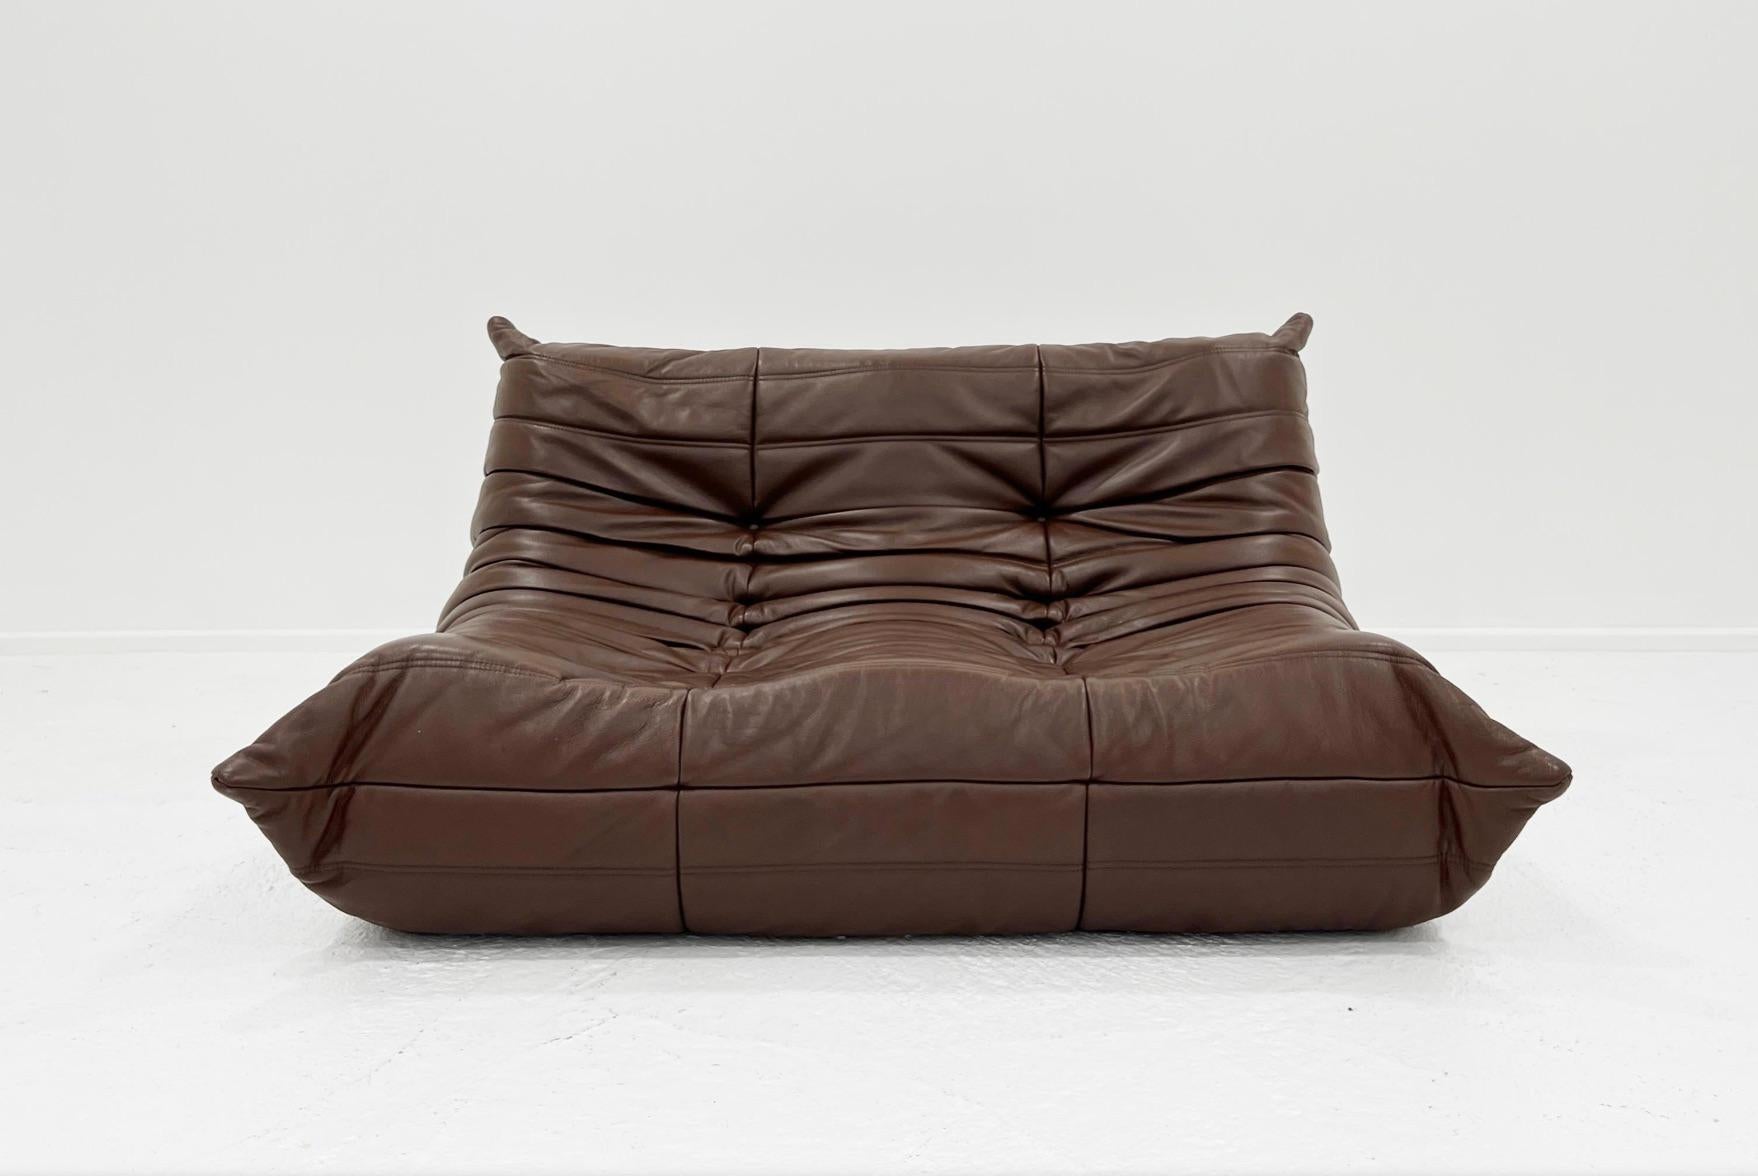 Two seat togo sofa, brown leather by Michel Ducaroy, Ligne Roset, France, 1970s

Originally designed in the 1970s the iconic togo sofa is now a design classic, this stunning chocolate brown leather sofa still has original labels and fabric lining